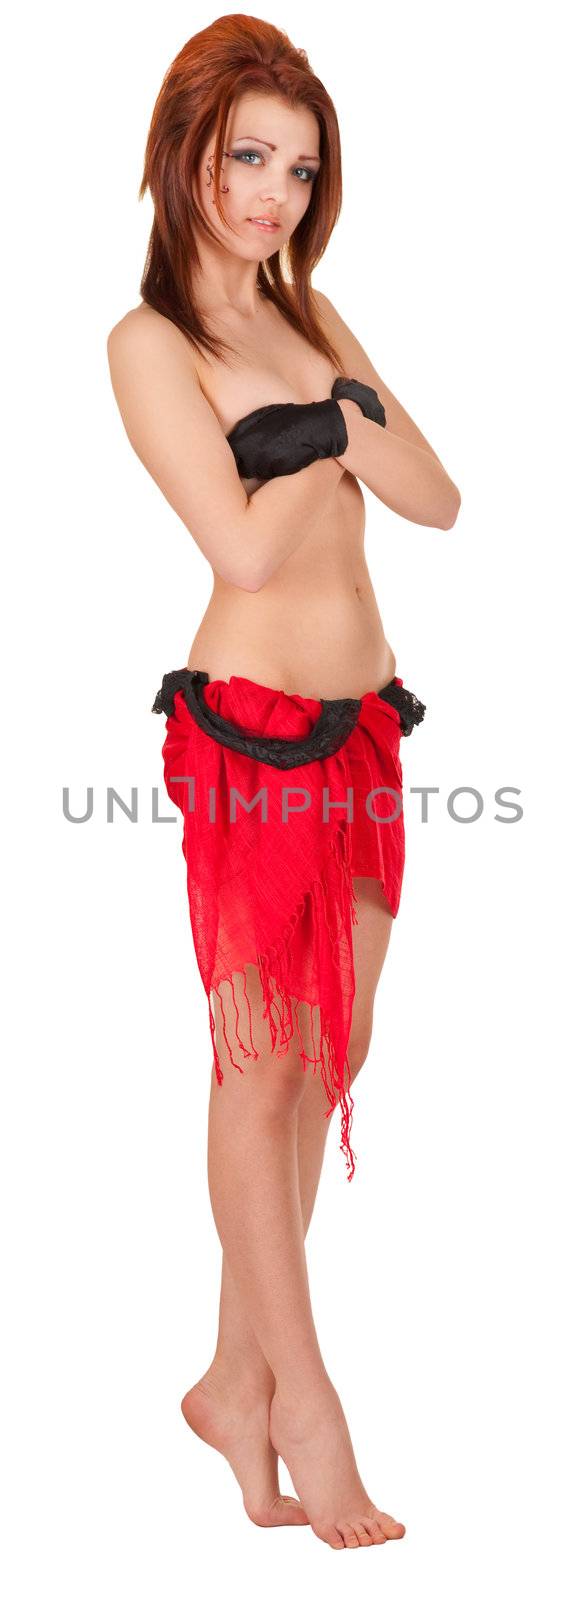 half-naked girl in a cabaret style on a white background